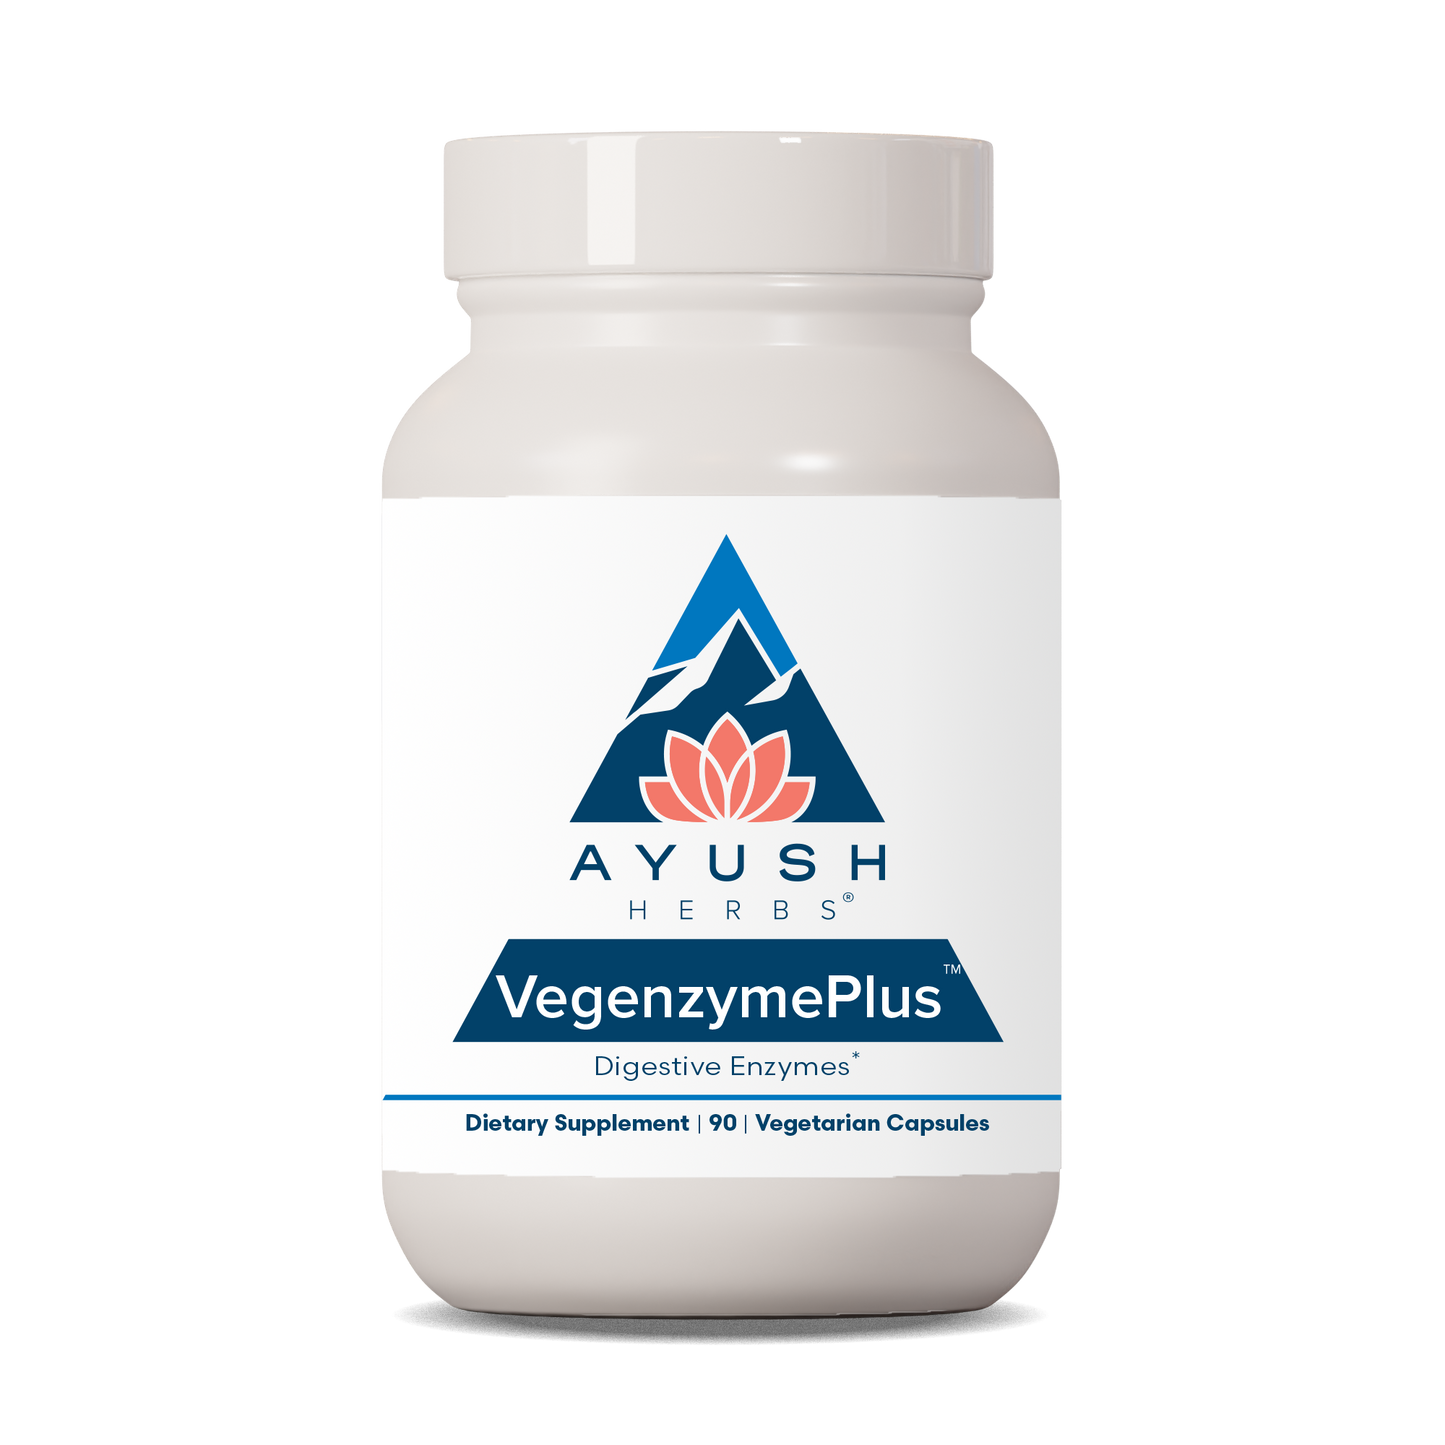 Vegenzyme Bottle front by Ayush herbs herbal supplements